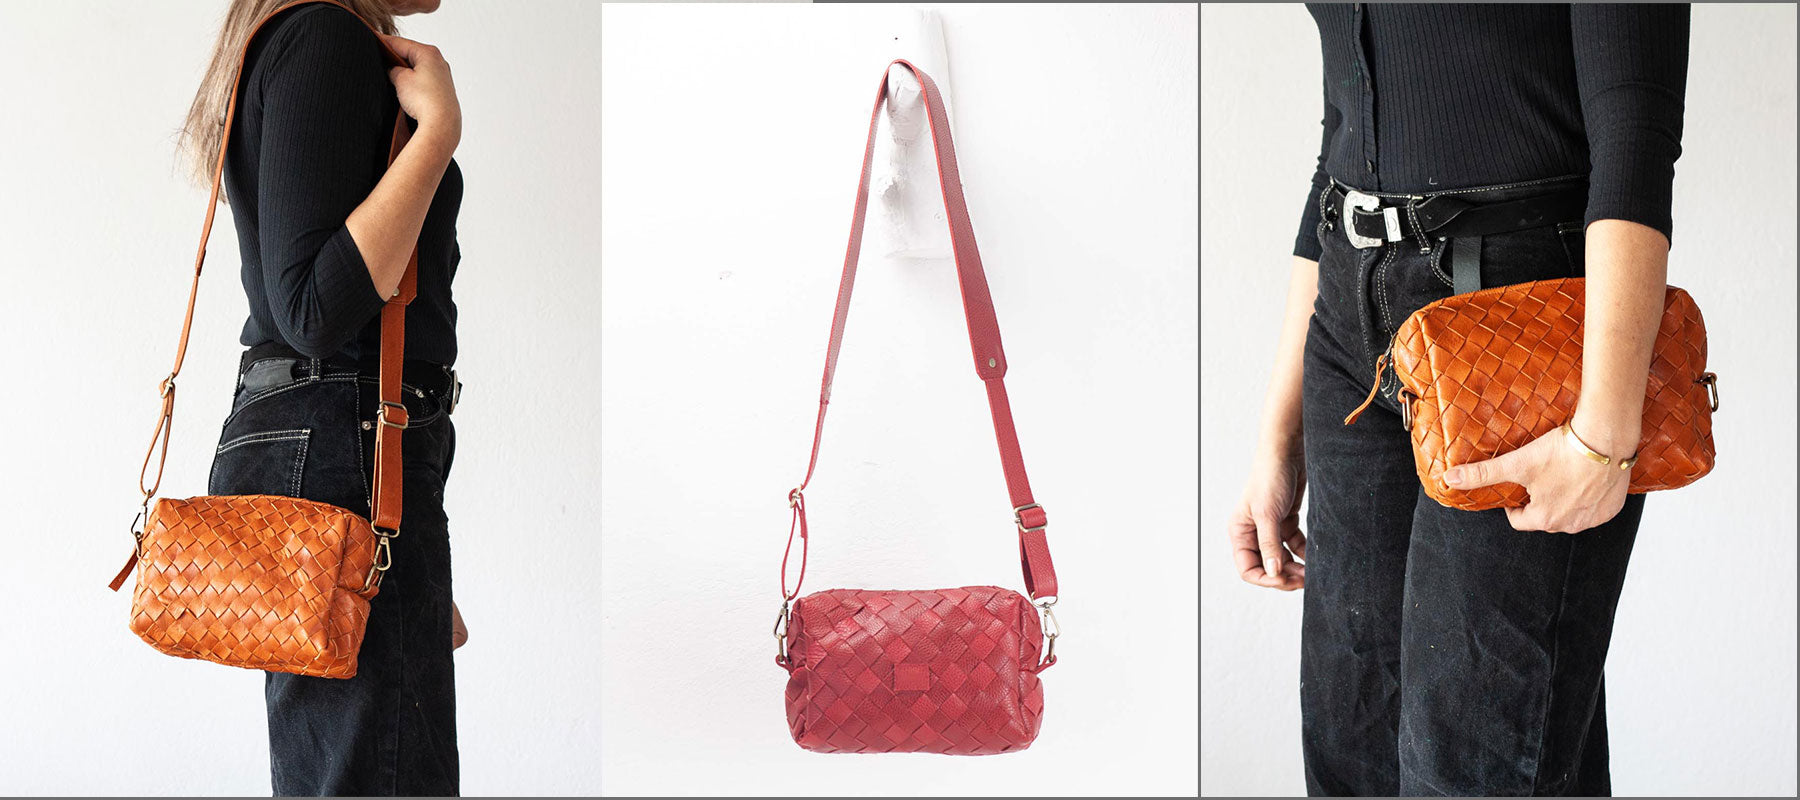 The Calliope purse | Milloobags